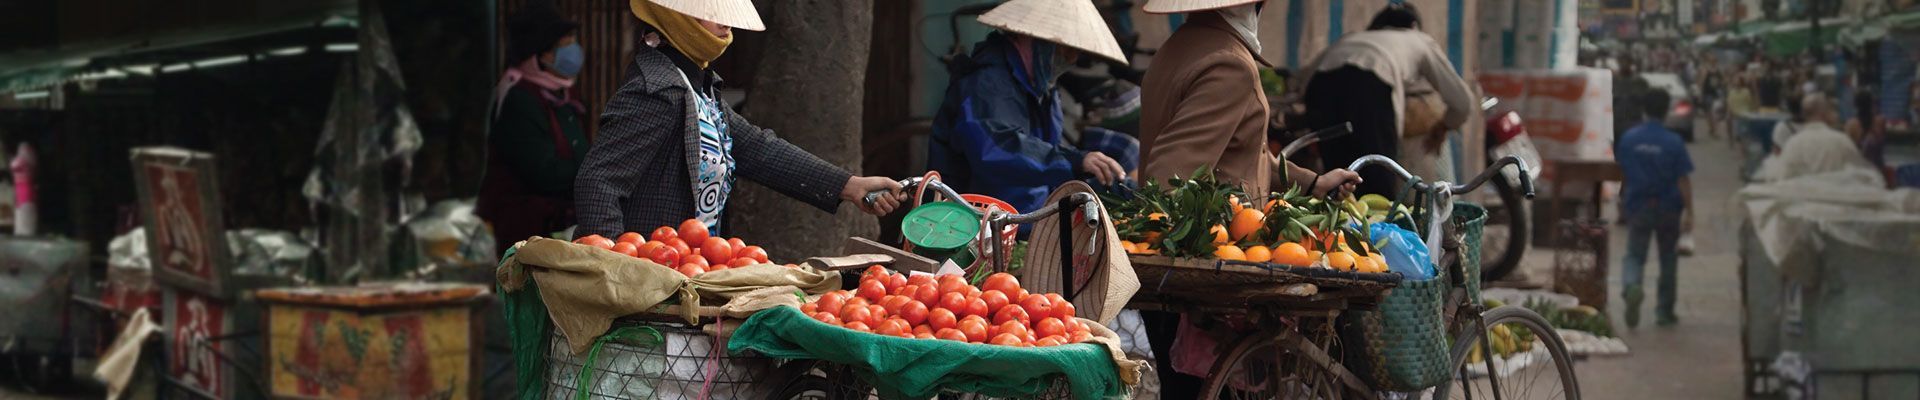 A group of people are standing on a sidewalk selling fruit and vegetables.